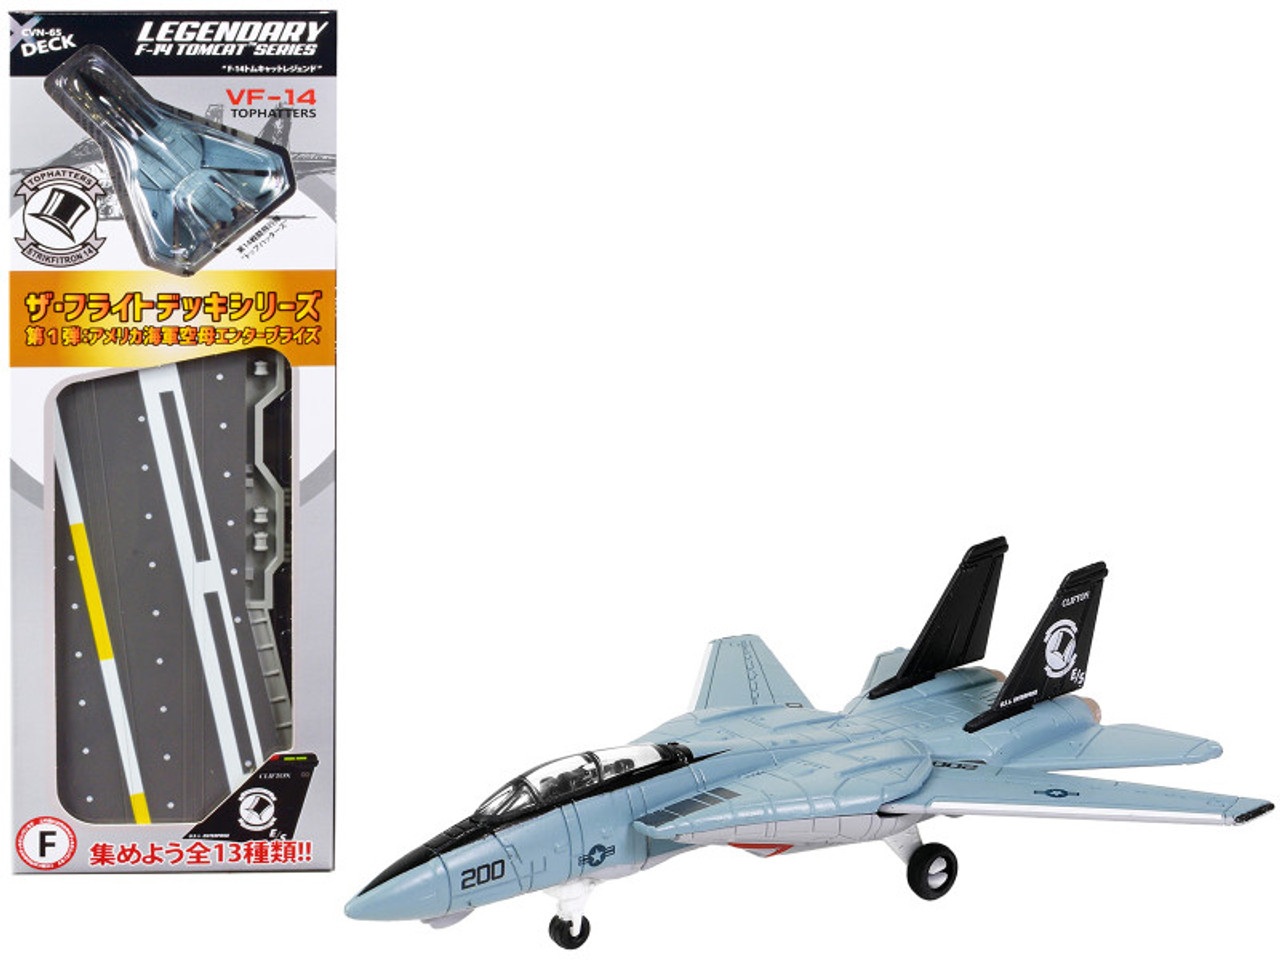 Grumman F-14 Tomcat Fighter Aircraft "VF-14 Tophatters" and Section F of USS Enterprise (CVN-65) Aircraft Carrier Display Deck "Legendary F-14 Tomcat" Series 1/200 Diecast Model by Forces of Valor